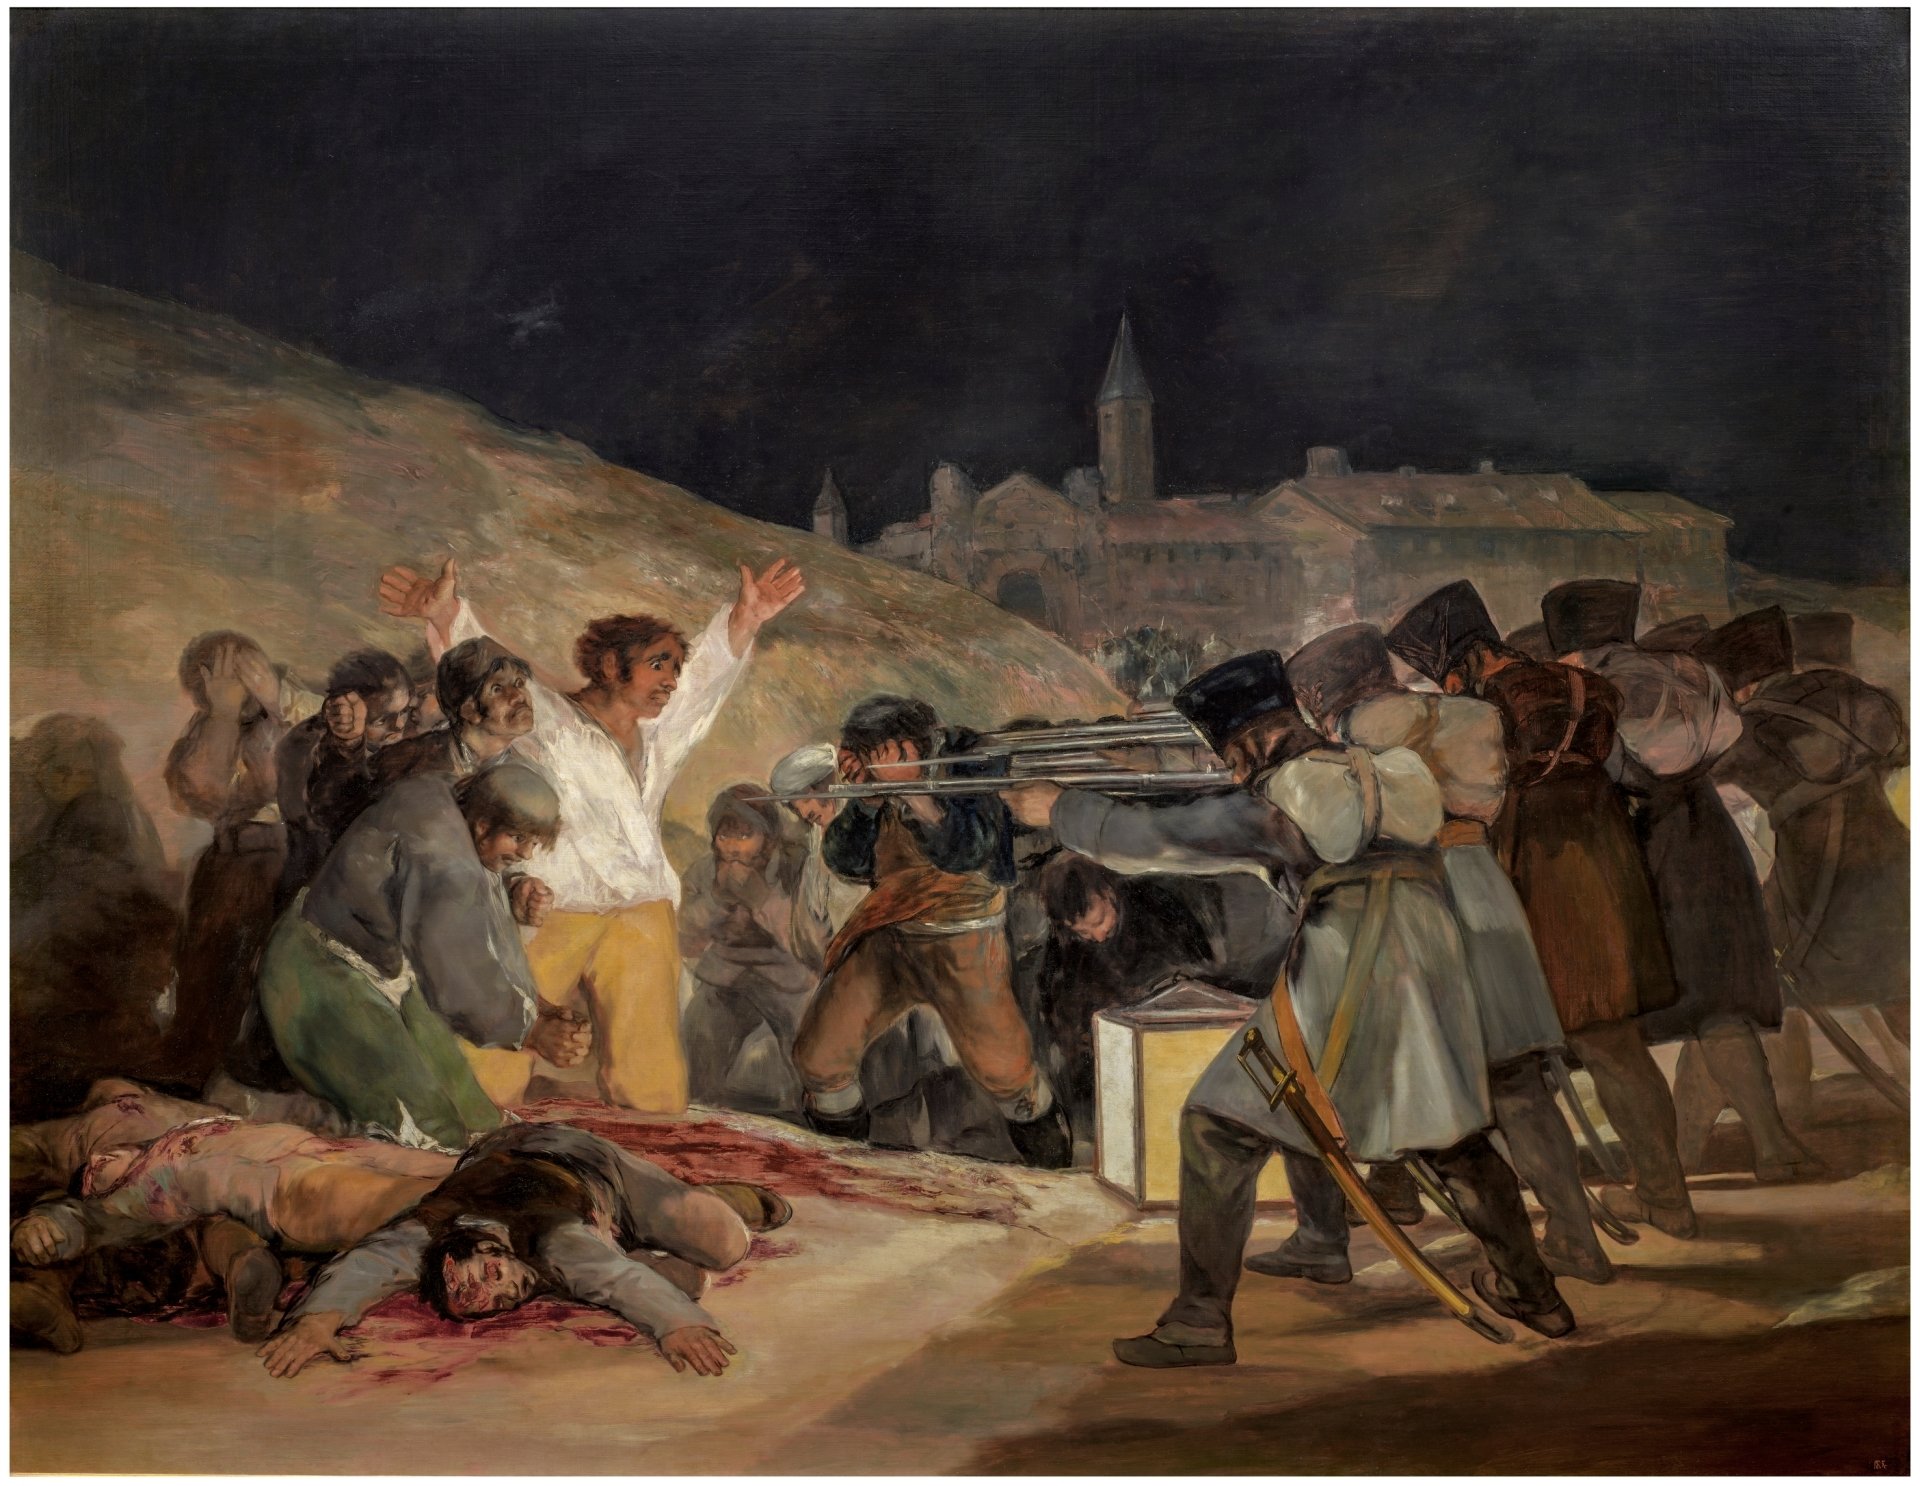 A painting, in the romantic style, depicting the execution of Spanish soldiers by the French.